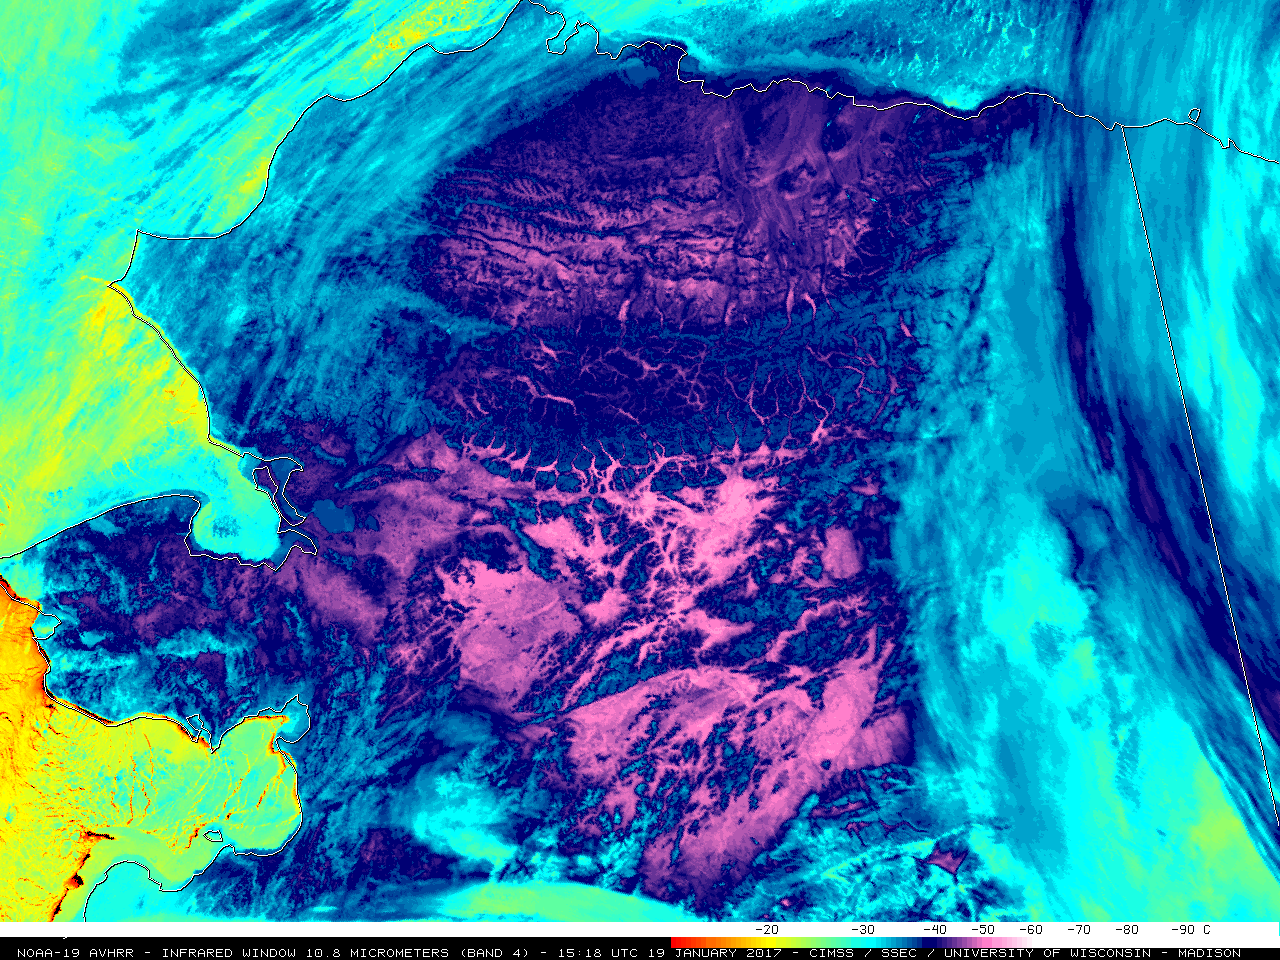 NOAA-19 AVHRR Infrared Window (10.8 µm) image, with surface air temperatures and corresponding station identifications [click to enlarge]